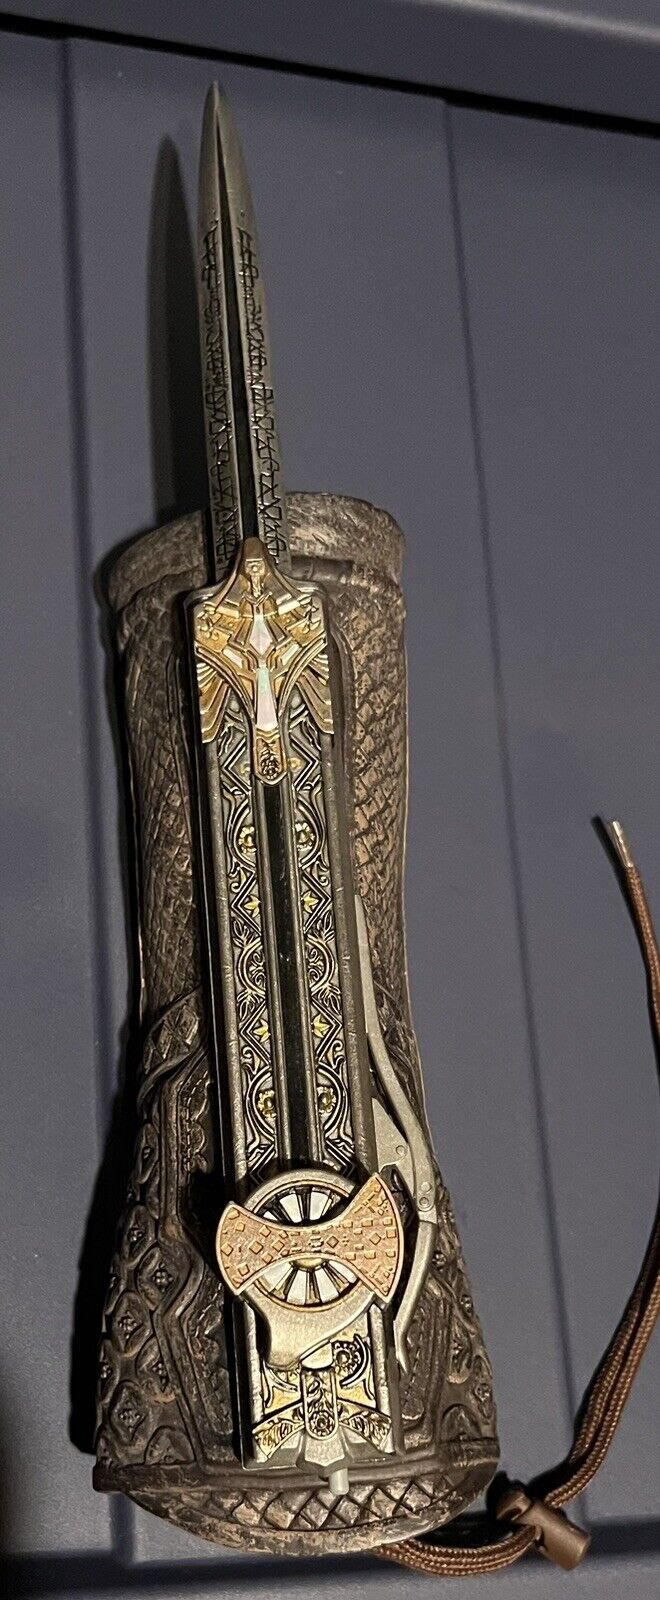 Assassin's Creed Hidden Blade of Aguilar Arm Guard Replica Cosplay McFarlane Toy